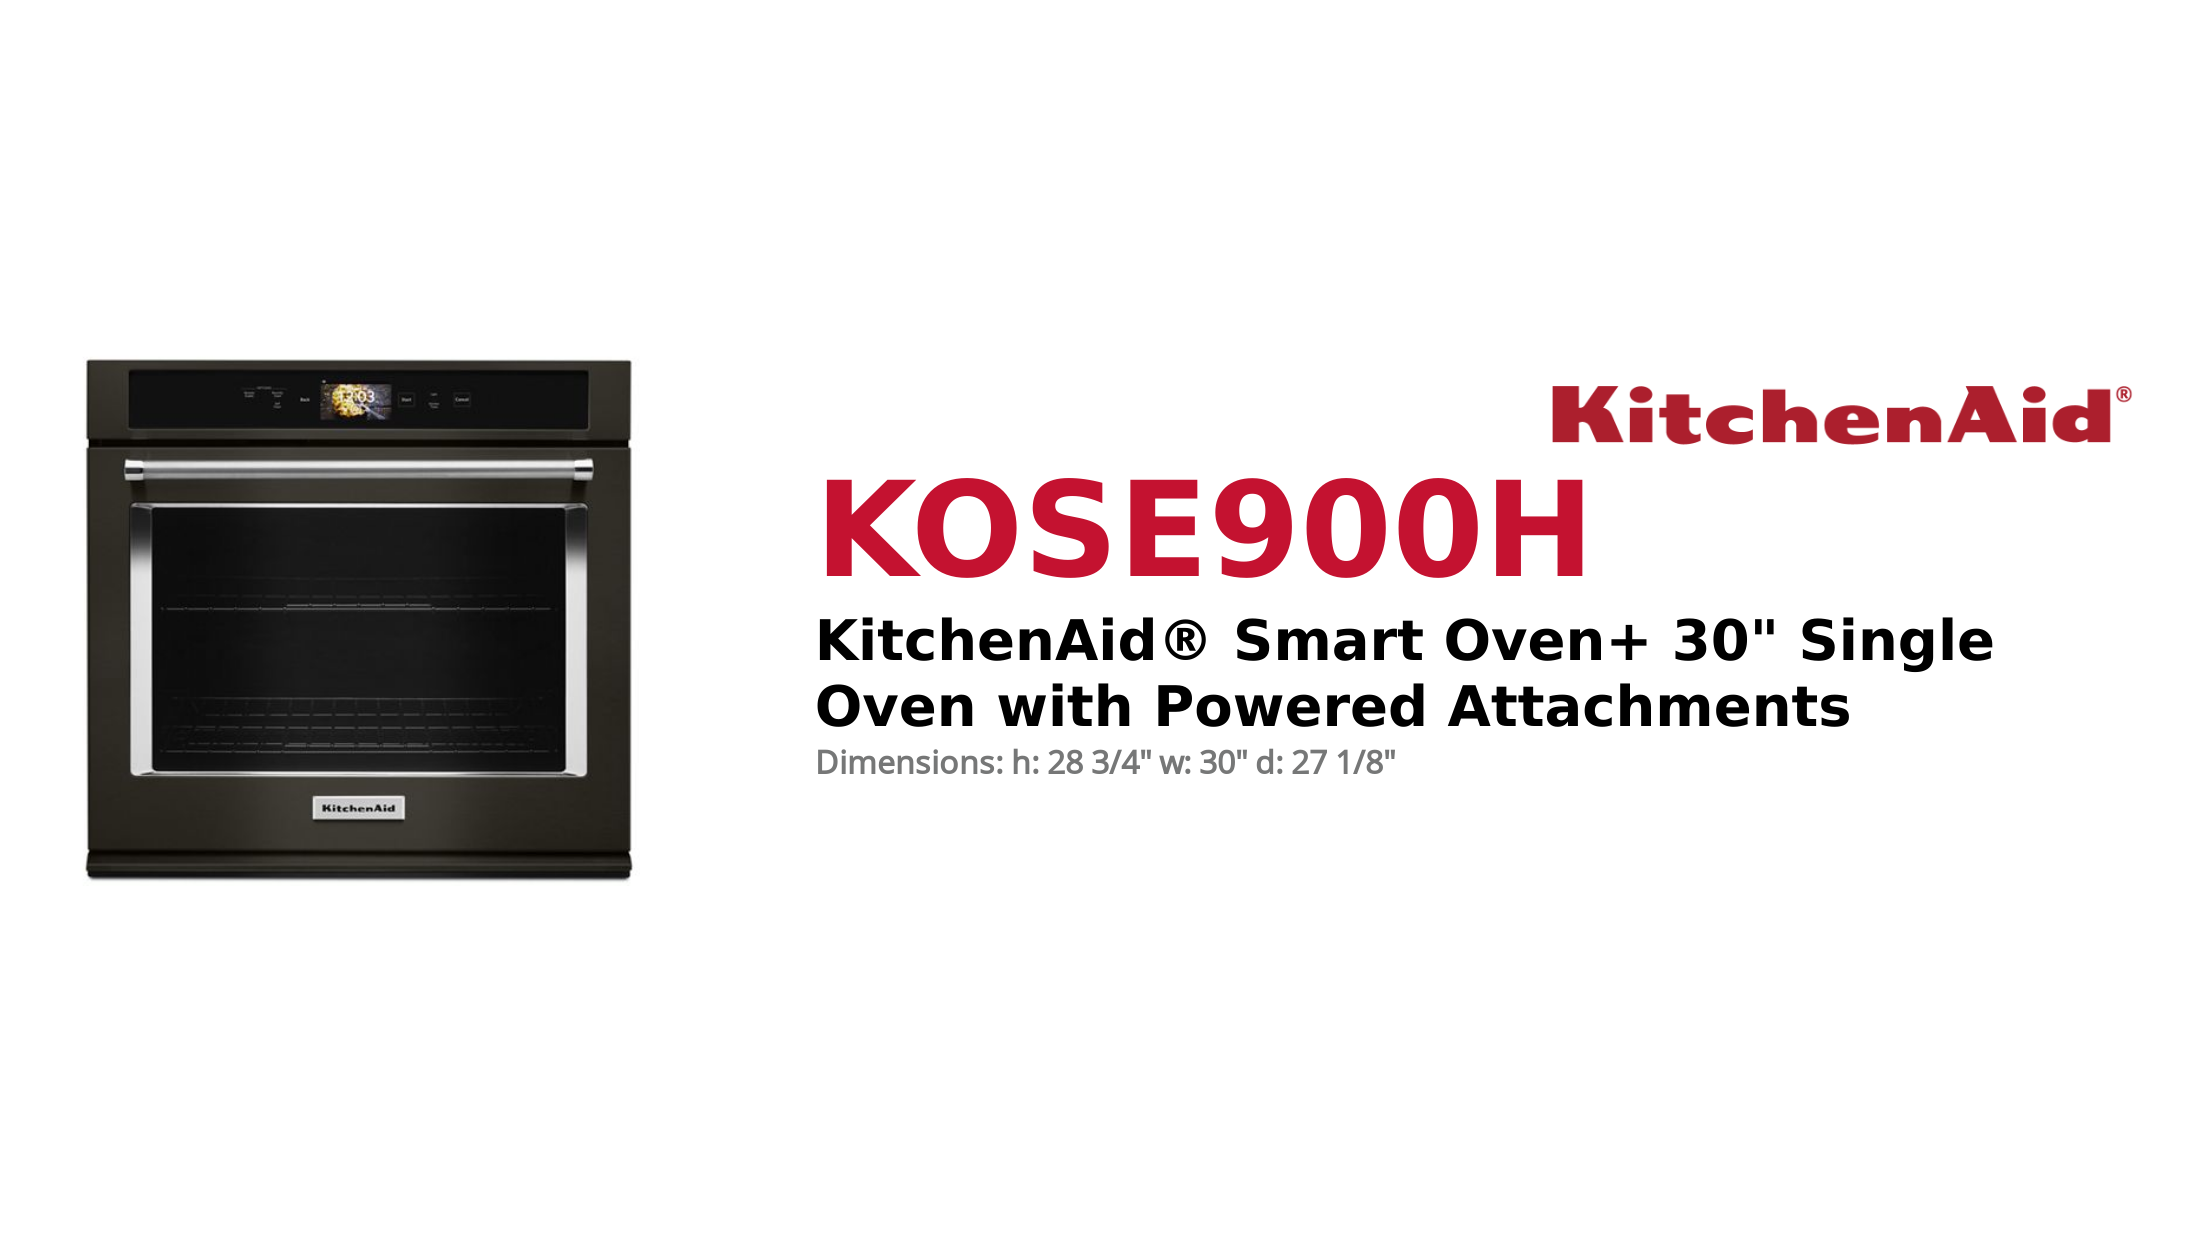 KOSE900H Product Brief